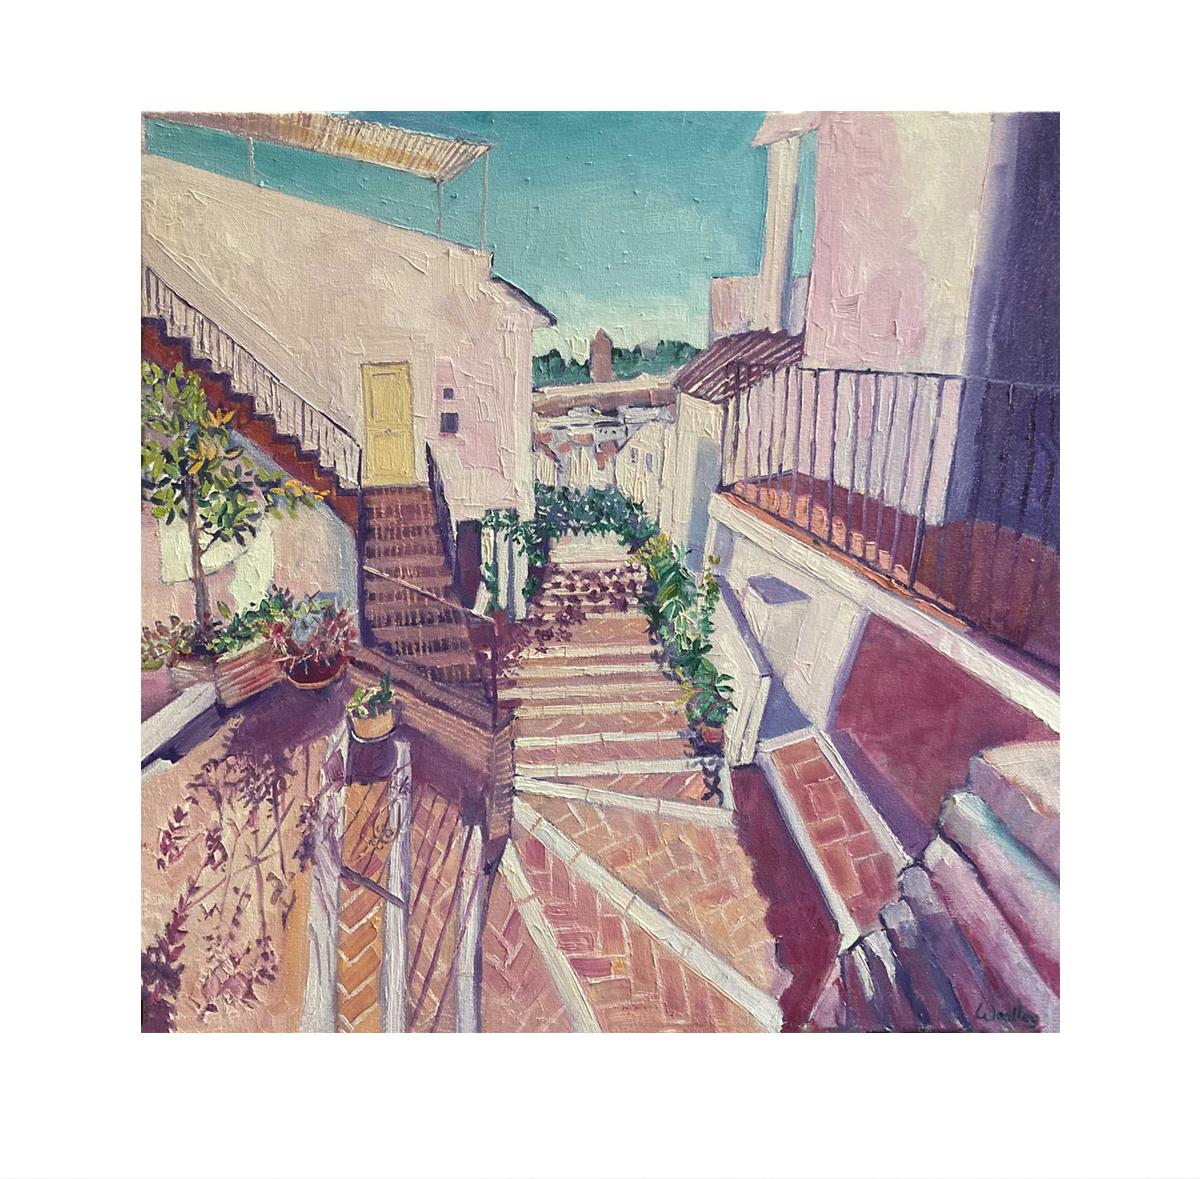 Plant Shadows Mijas is an Original Painting by Eleanor Woolley. This painting was sketched in Mijas and finished in the Studio in Gloucestershire. Walking back down from the Monastery La Ermita del Calvario I came across this cascade of terracotta